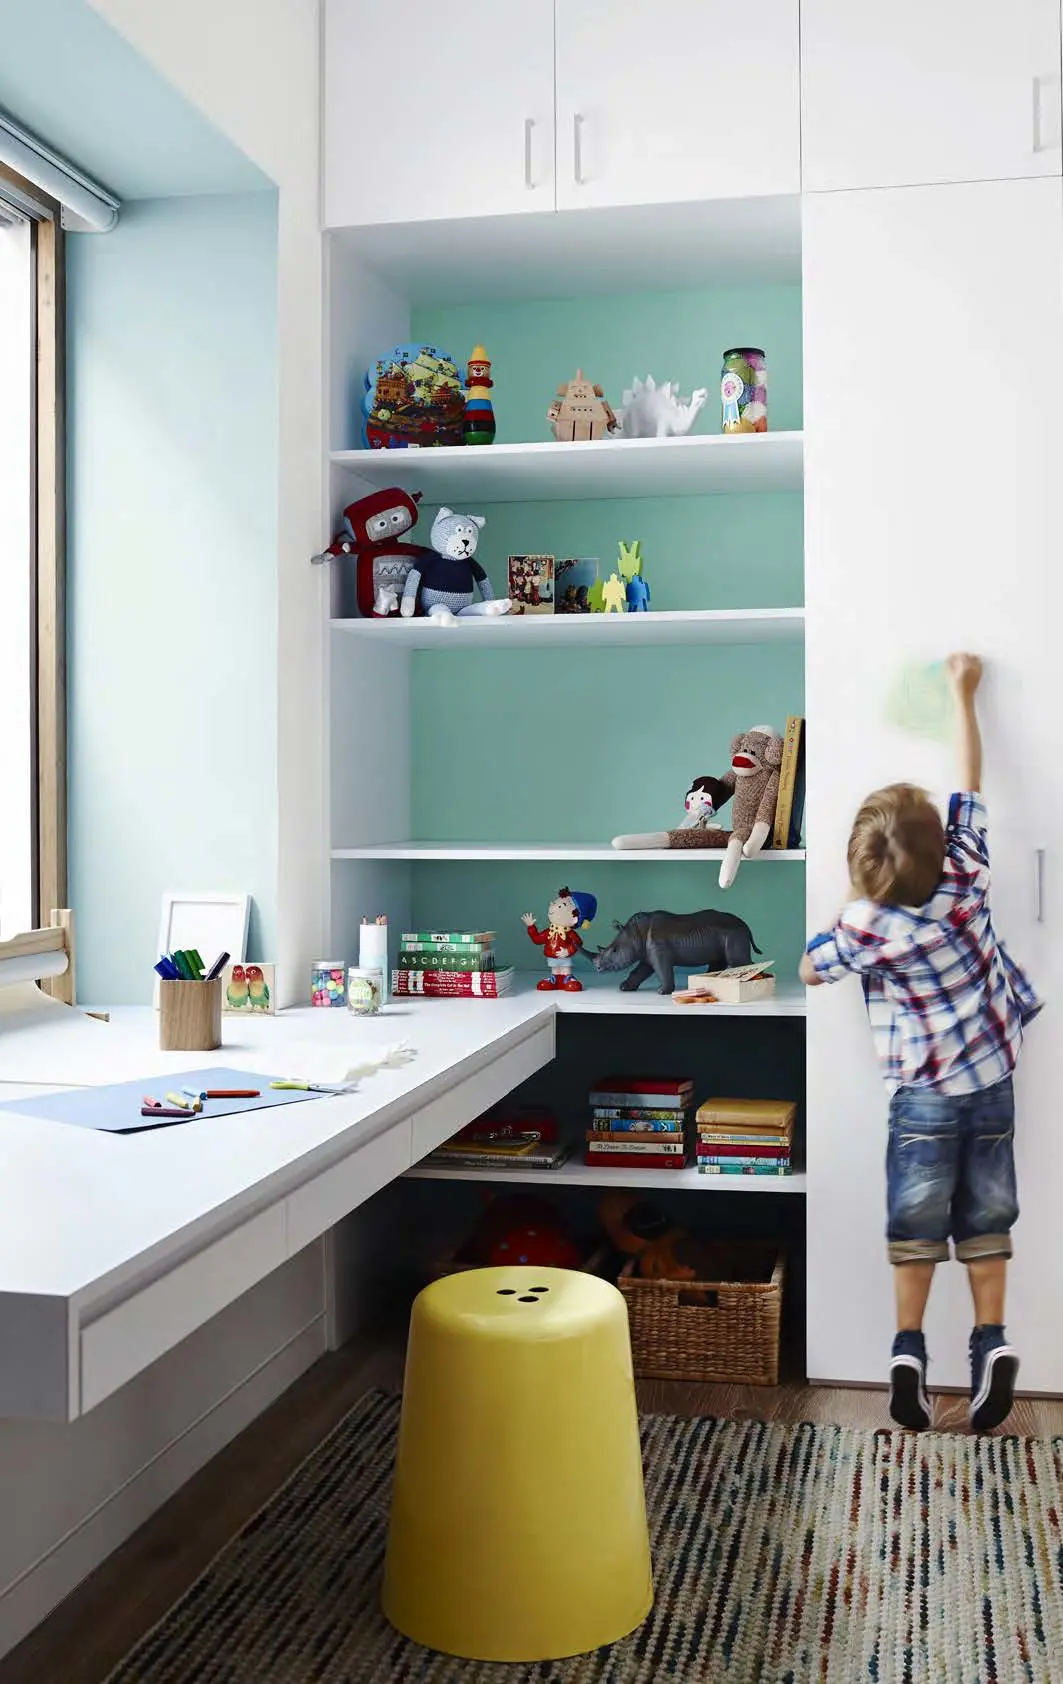 Children's play room with toys on bookshelf in Dulux Wash&Wear in Lexicon Quarter, Surf Watch, and Shimmer Quarter. Stylists: Bree Leech and Heather Nette King. Photographer: Lisa Cohen